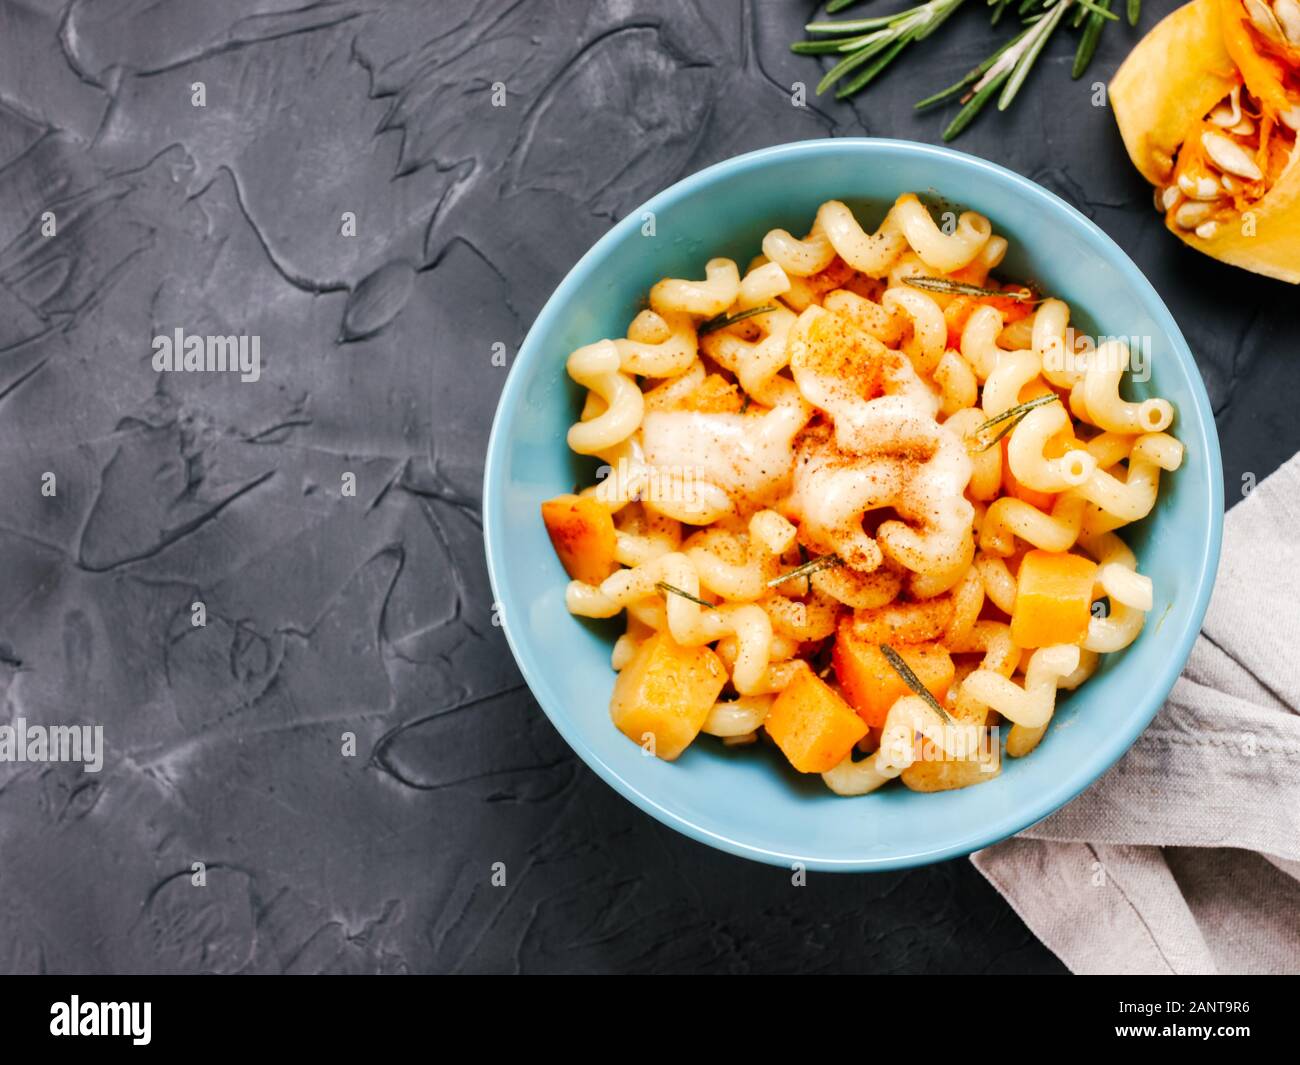 Fusilli pasta with pumpkin, rosemary and brie cheese. Idea recipe pasta. Vegetarian food. Homemade pasta dish in blue bowl over black concrete background. Copy space. Top view or flat lay. Stock Photo